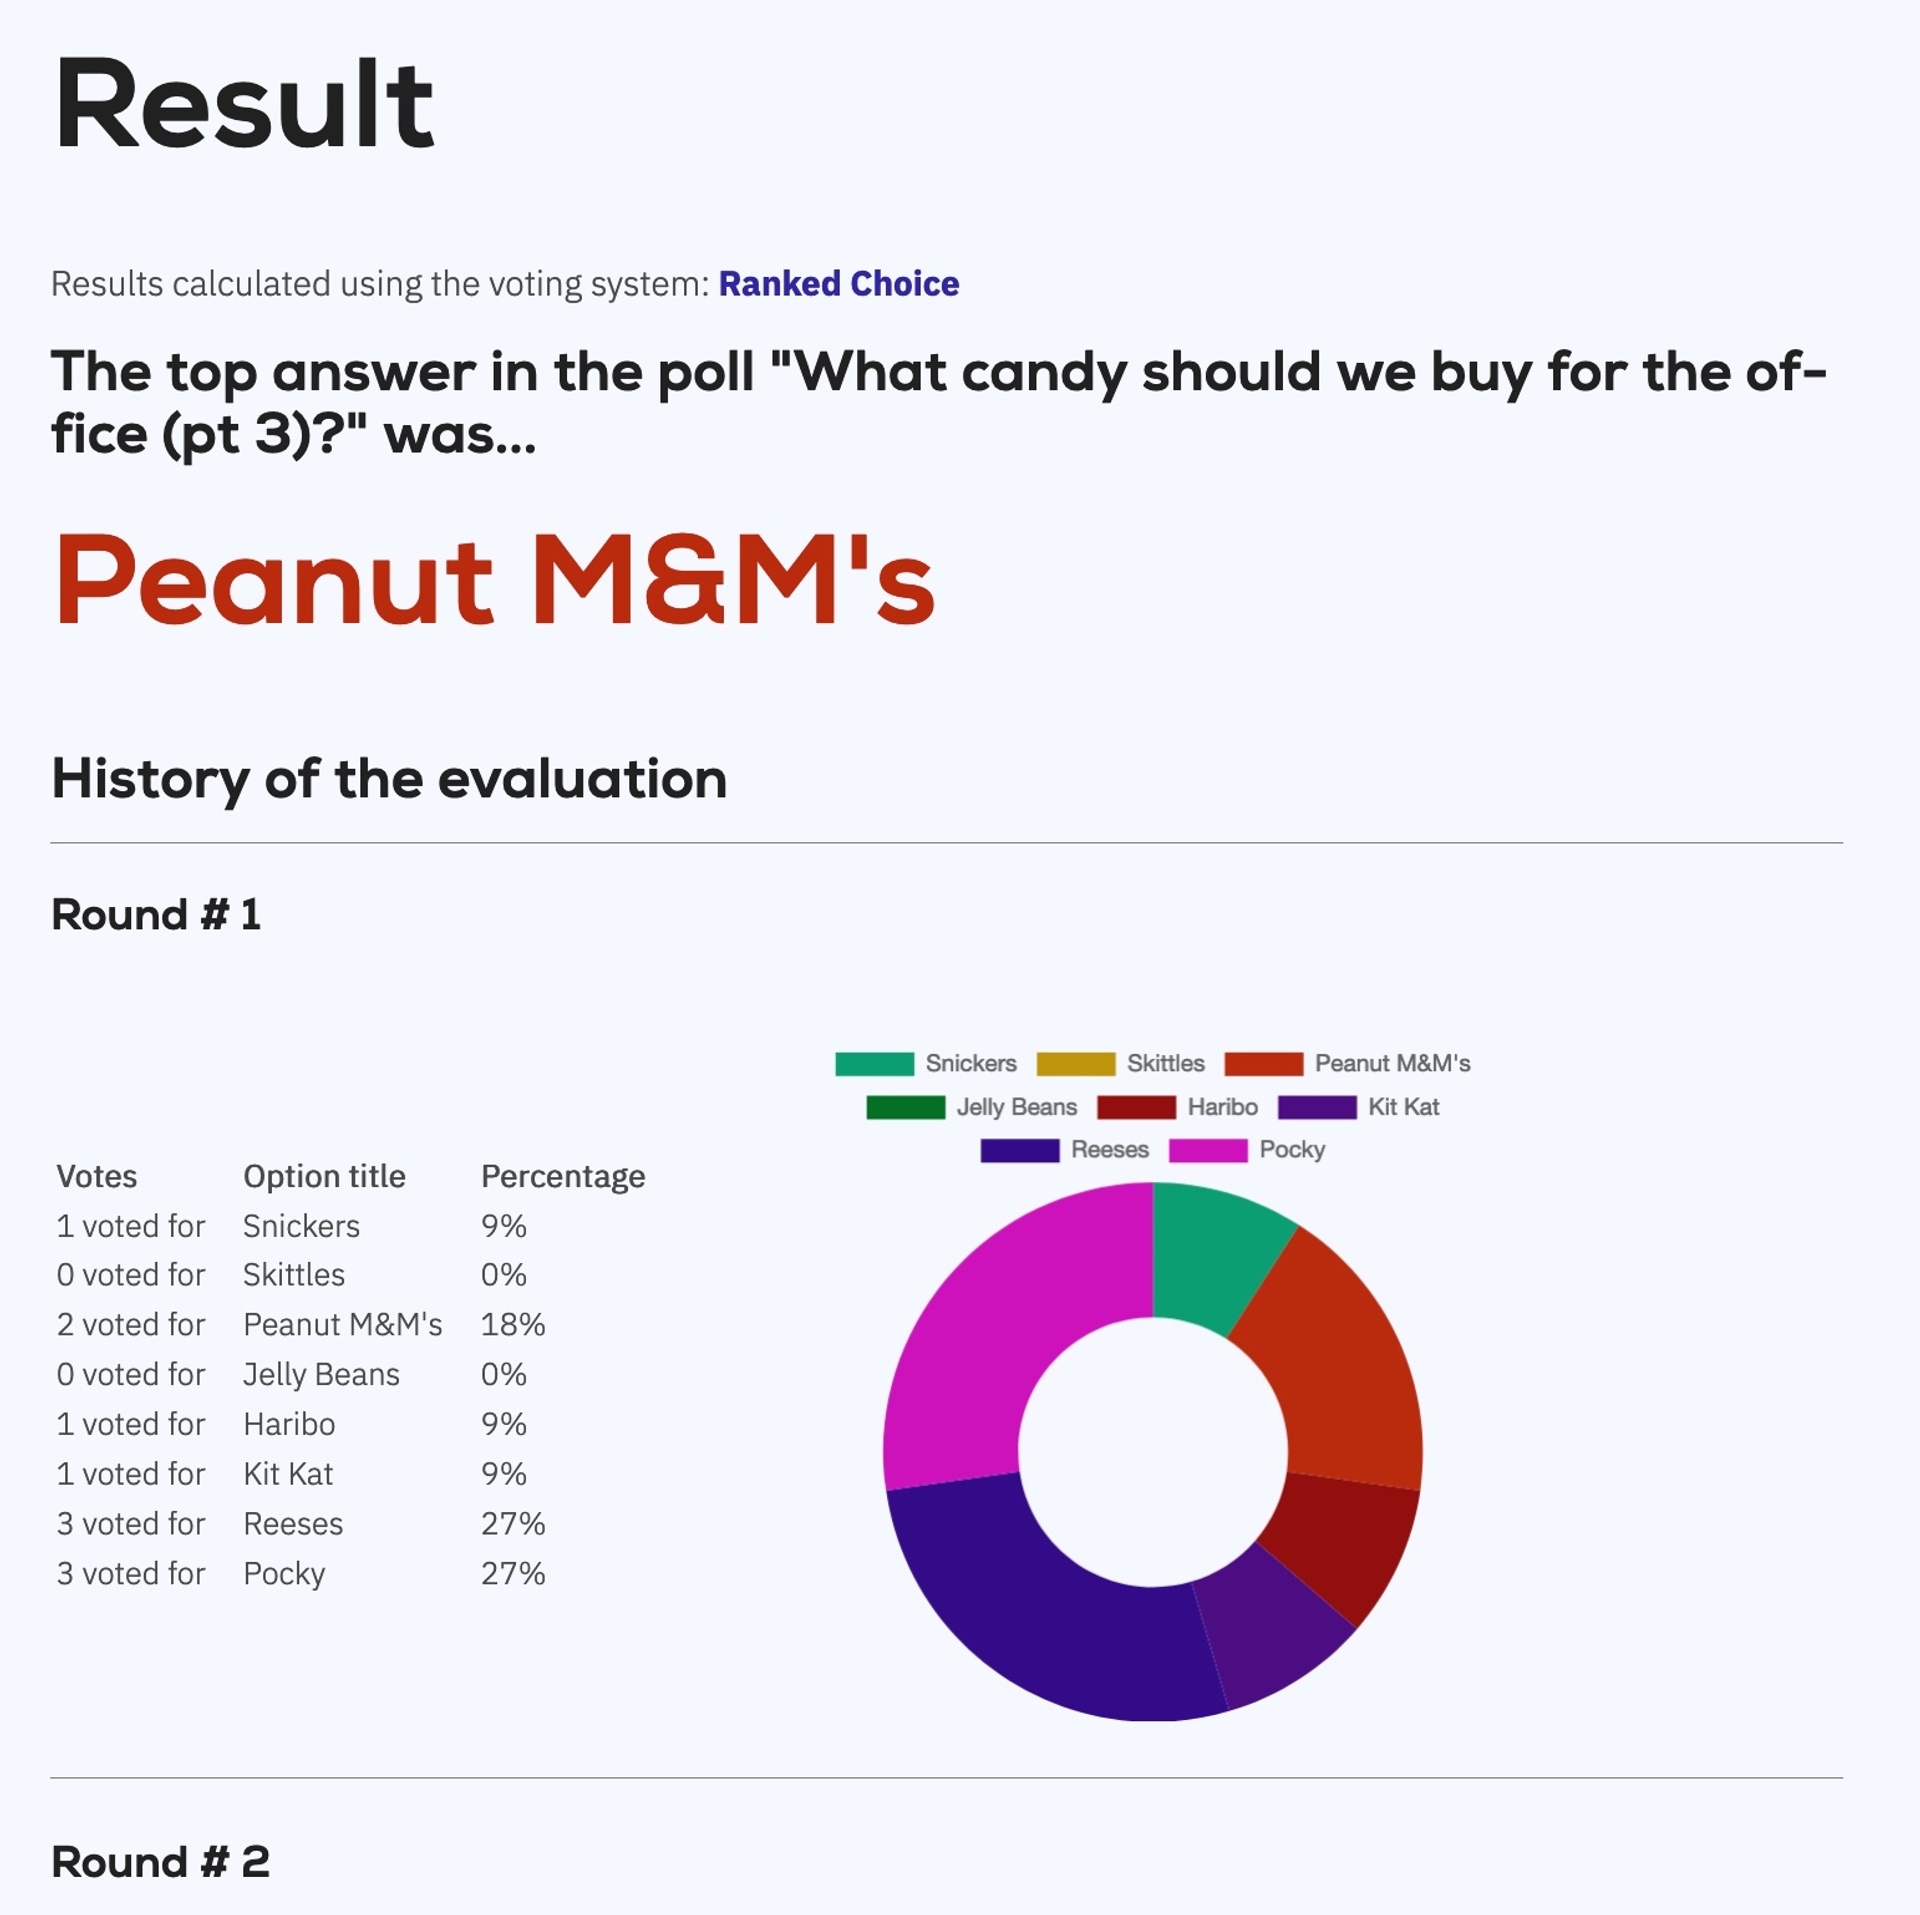 The results of the ranked choice voting system, revealing the winner to be Peanut M&Ms.